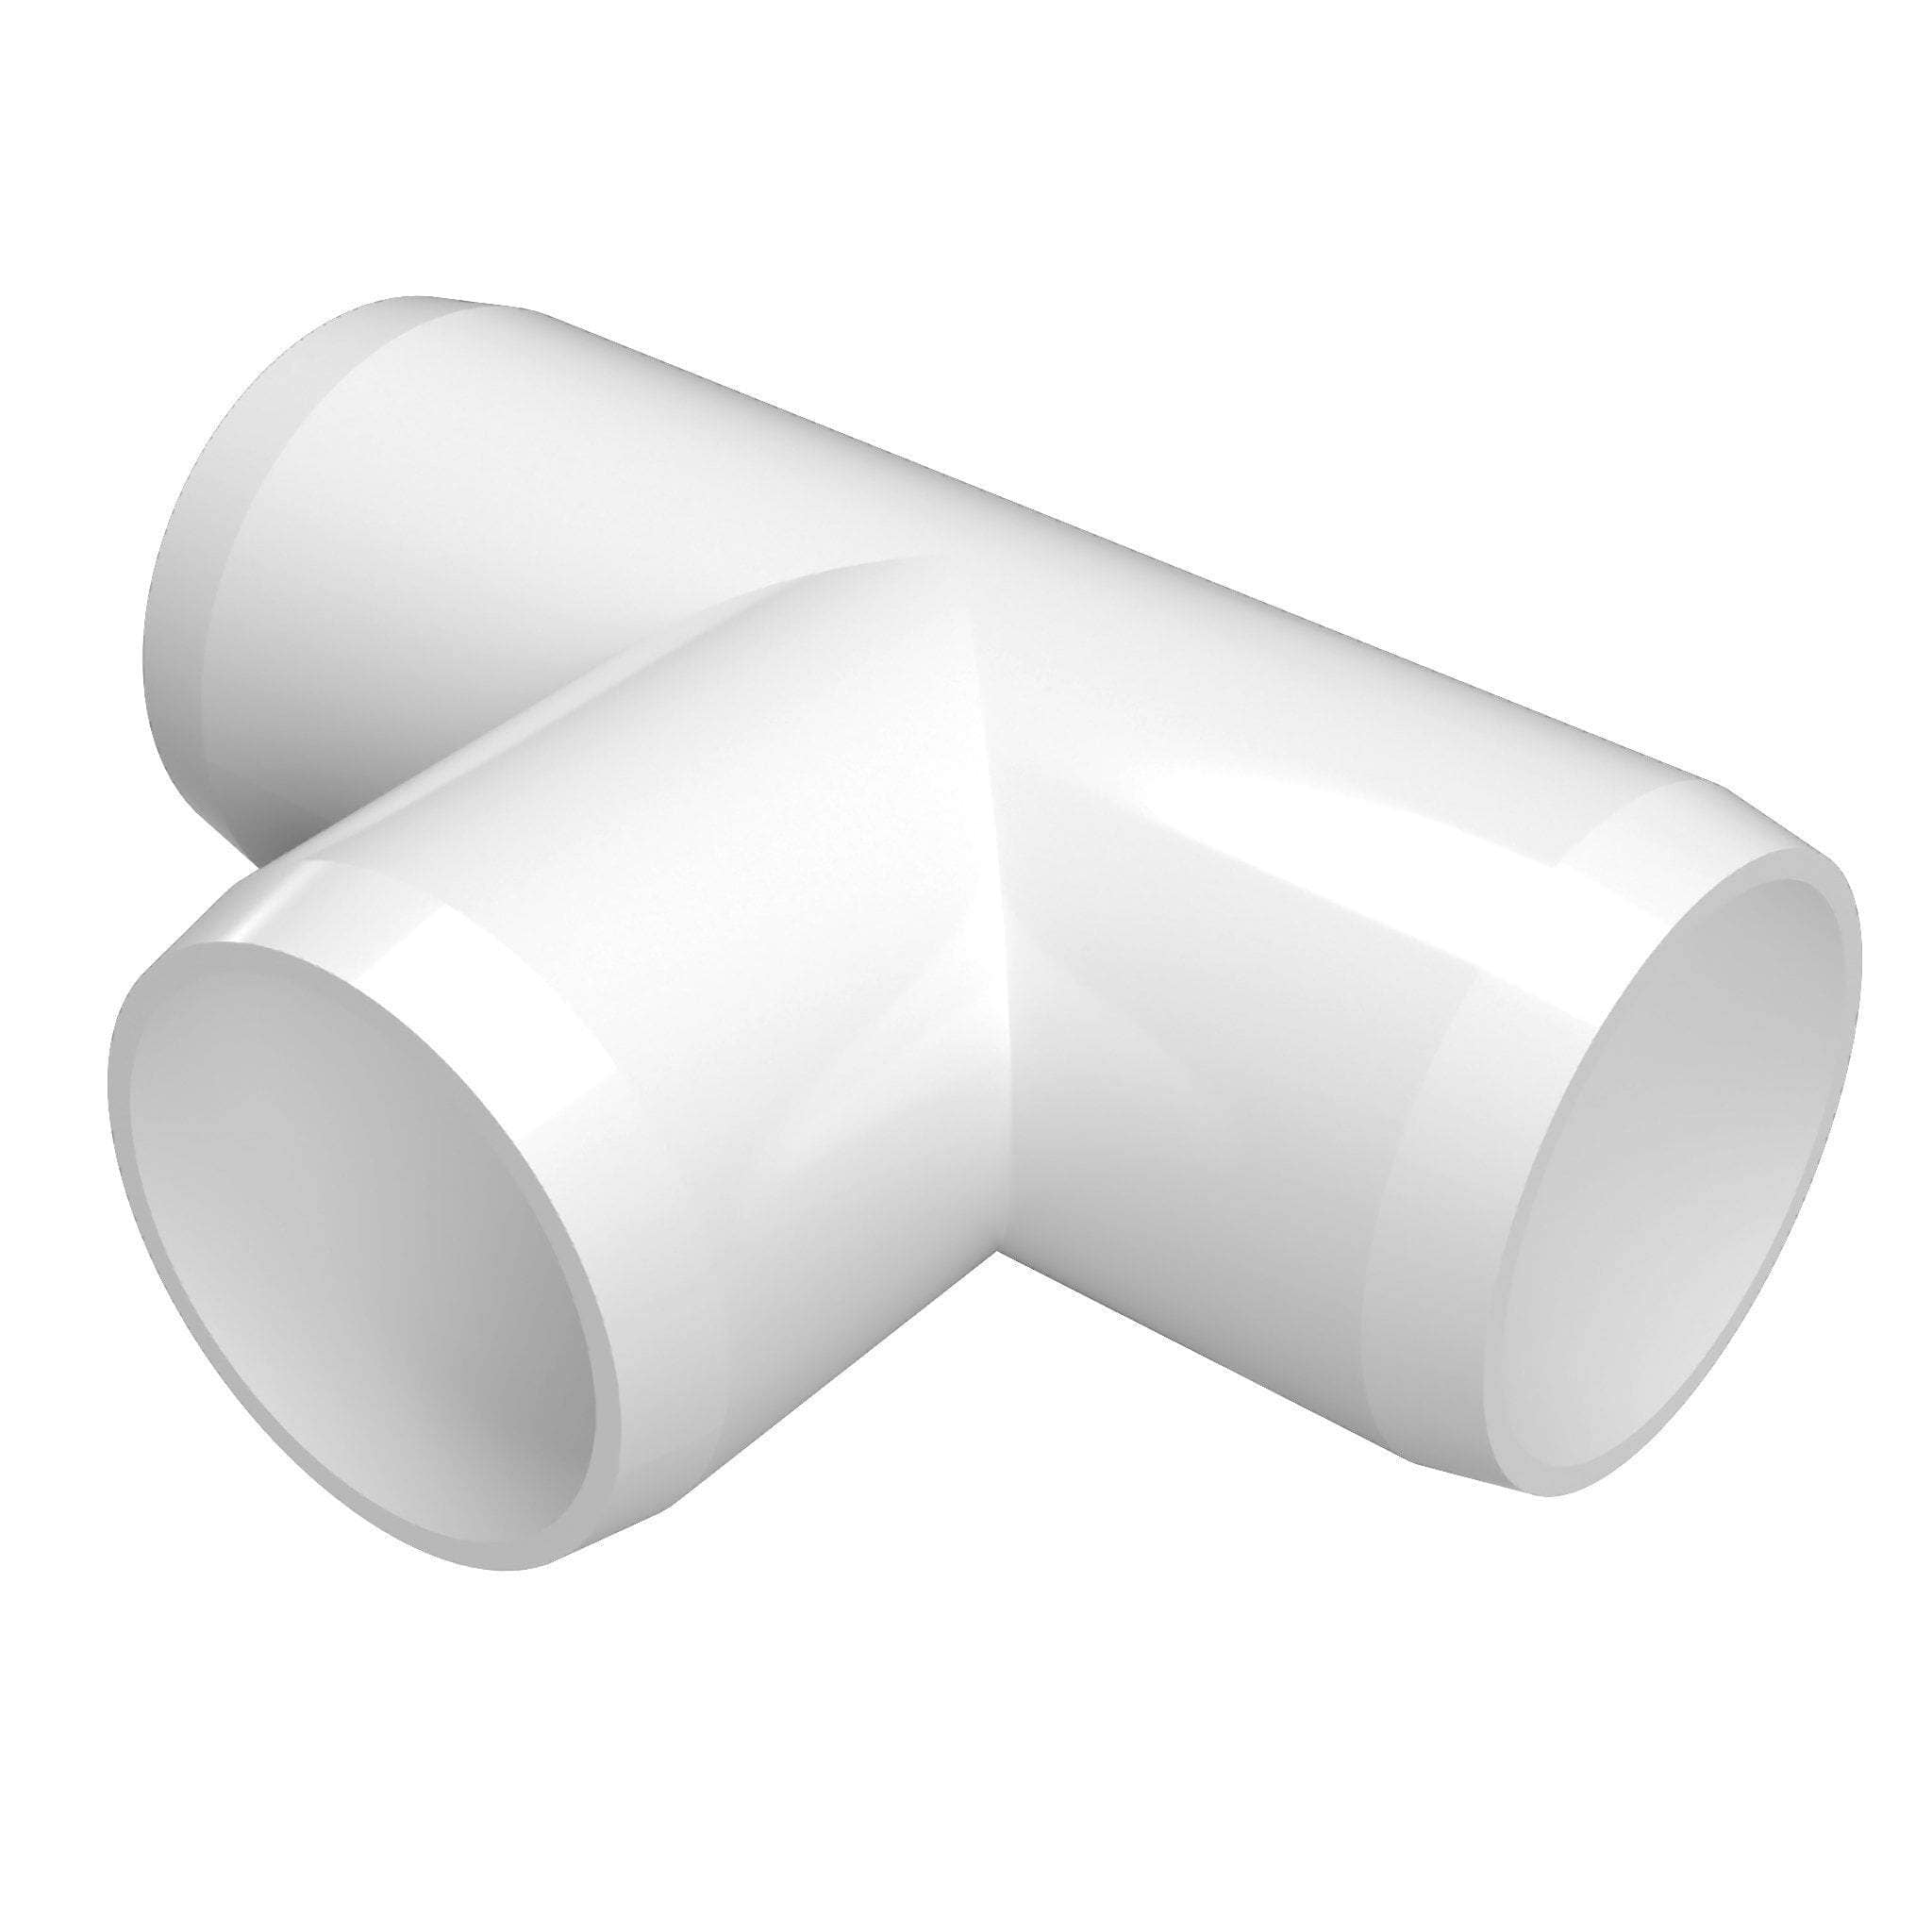 PVC p/t tee fitting 1/2'' inch for PVC pipe connector